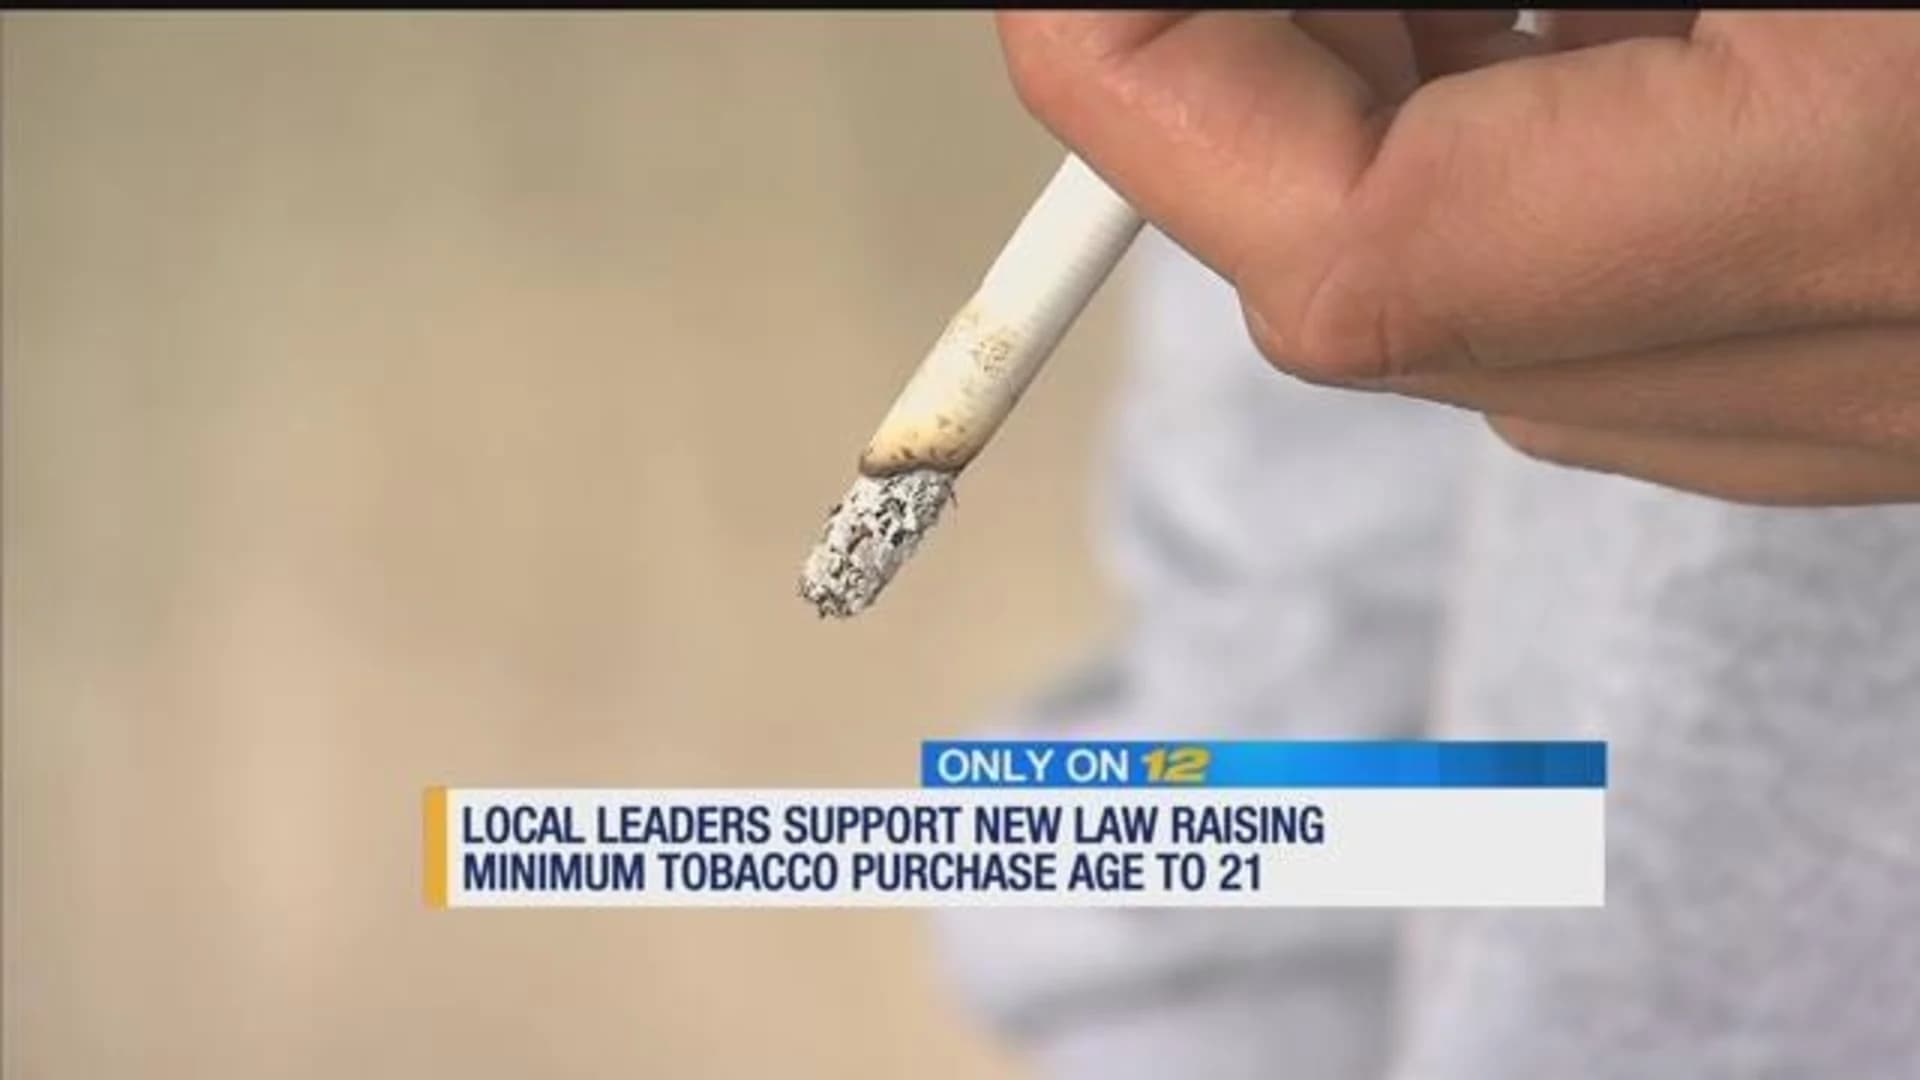 'Milestone moment:' New law raising tobacco purchase age goes into effect Tuesday